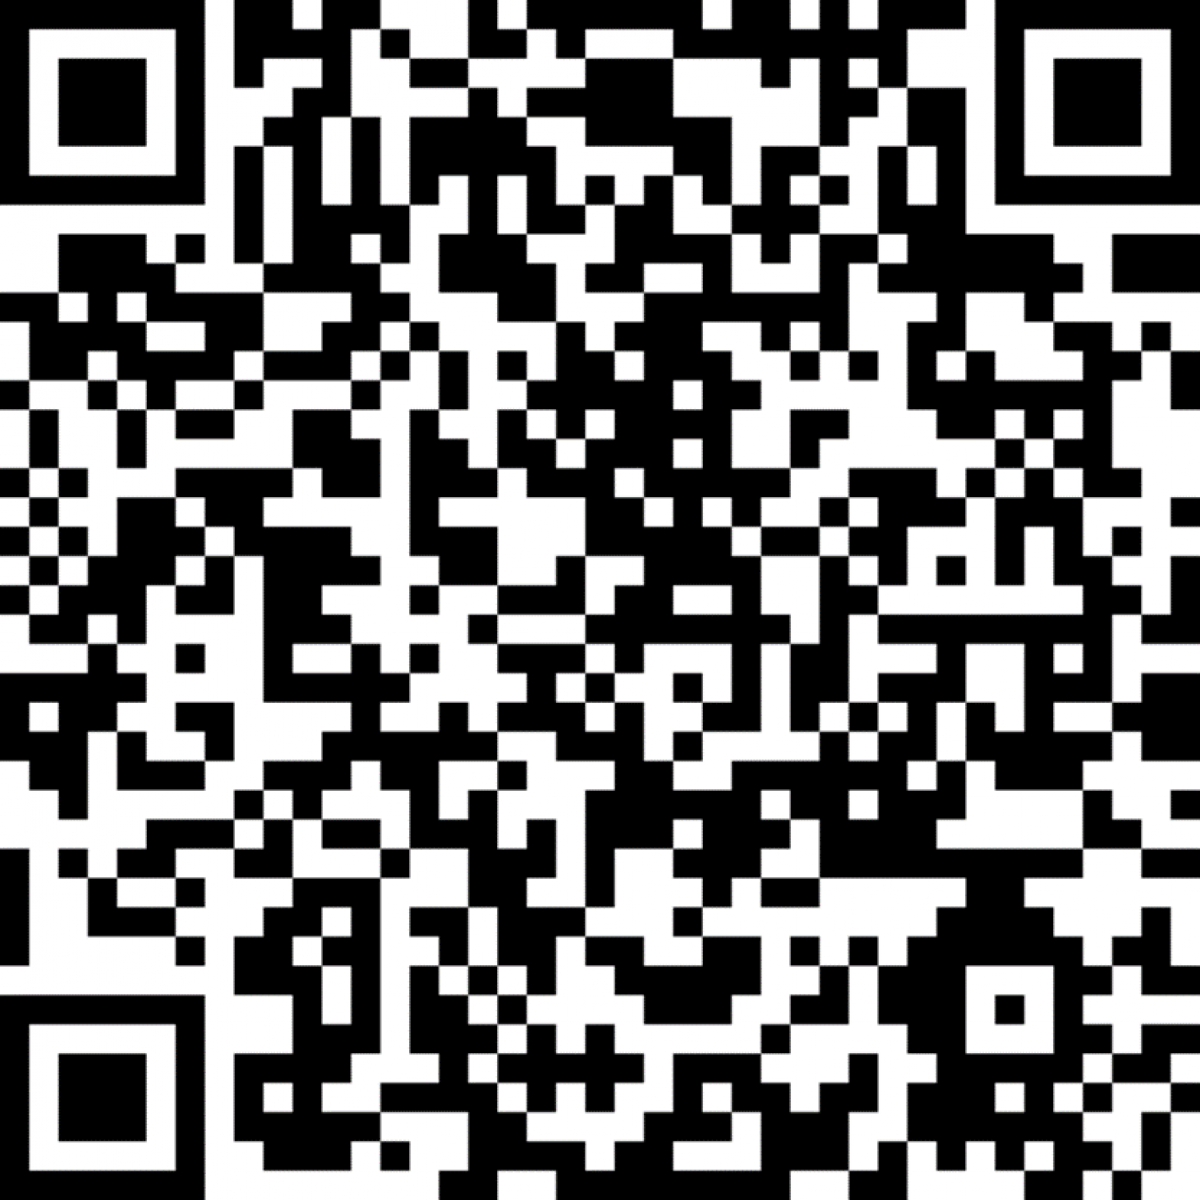 Scan the QR code for the HPHT Webinar by PDL Engineering Manager Richard Farnell